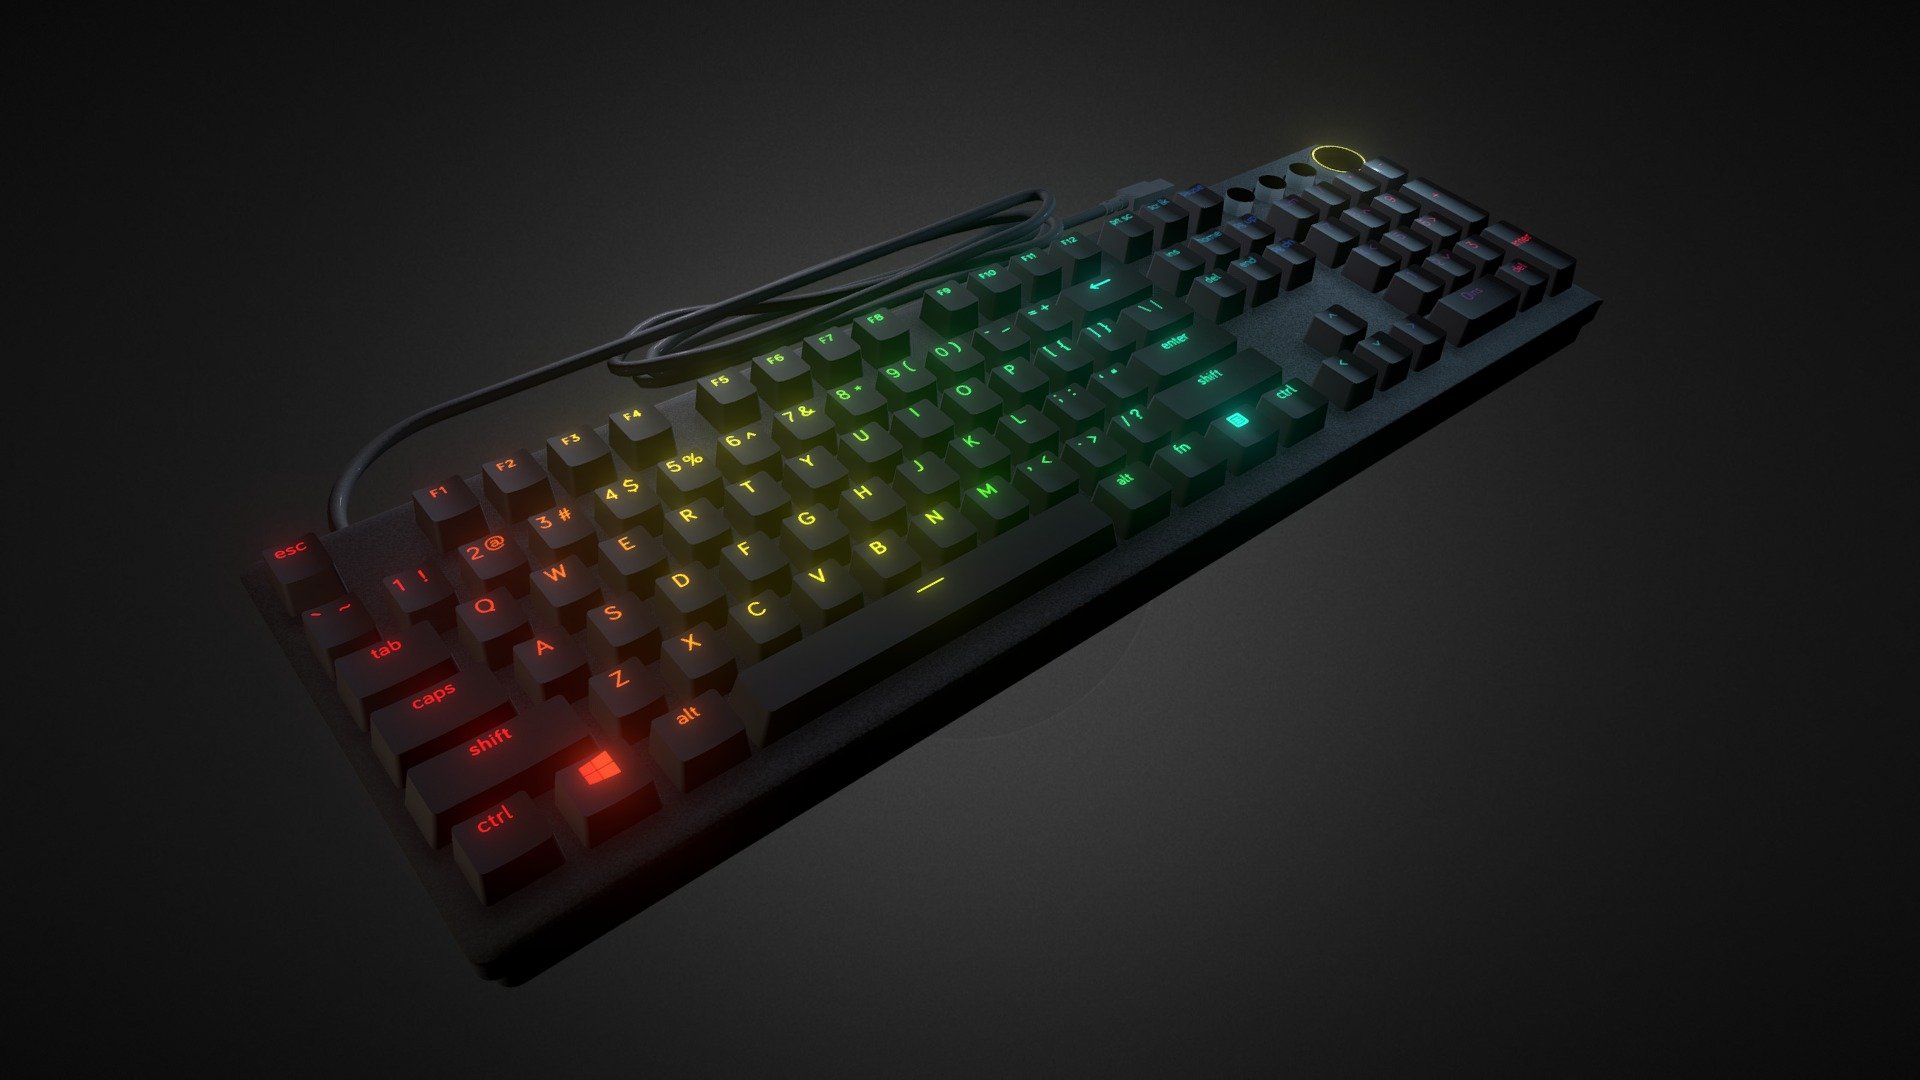 A High-Quality accurate model for the great mechanical keyboard Razer Huntsman V2.
The model is fully textured and modeled in Blender.



Stats:

Objects Count: 15

Poly Count: 377,522 (53,706 Without Switches)

Vertex Count: 189,492 (27,366 Without Switches)



File Formats:

.blend 30 MB

.fbx 12 MB

.obj 24 MB



Textures:

All Textures are 4096x4096 pixels and contains:

Huntsman_Diffuse.png

Huntsman_Emission.png

Huntsman_Normal.png

Huntsman_Switches_Diffuse.png*

*All objects share the same textures except fot the switches because they are so dense, so they have their own texture map (Basically Just Red color)

I hope you like it and please give me feedback 3d model